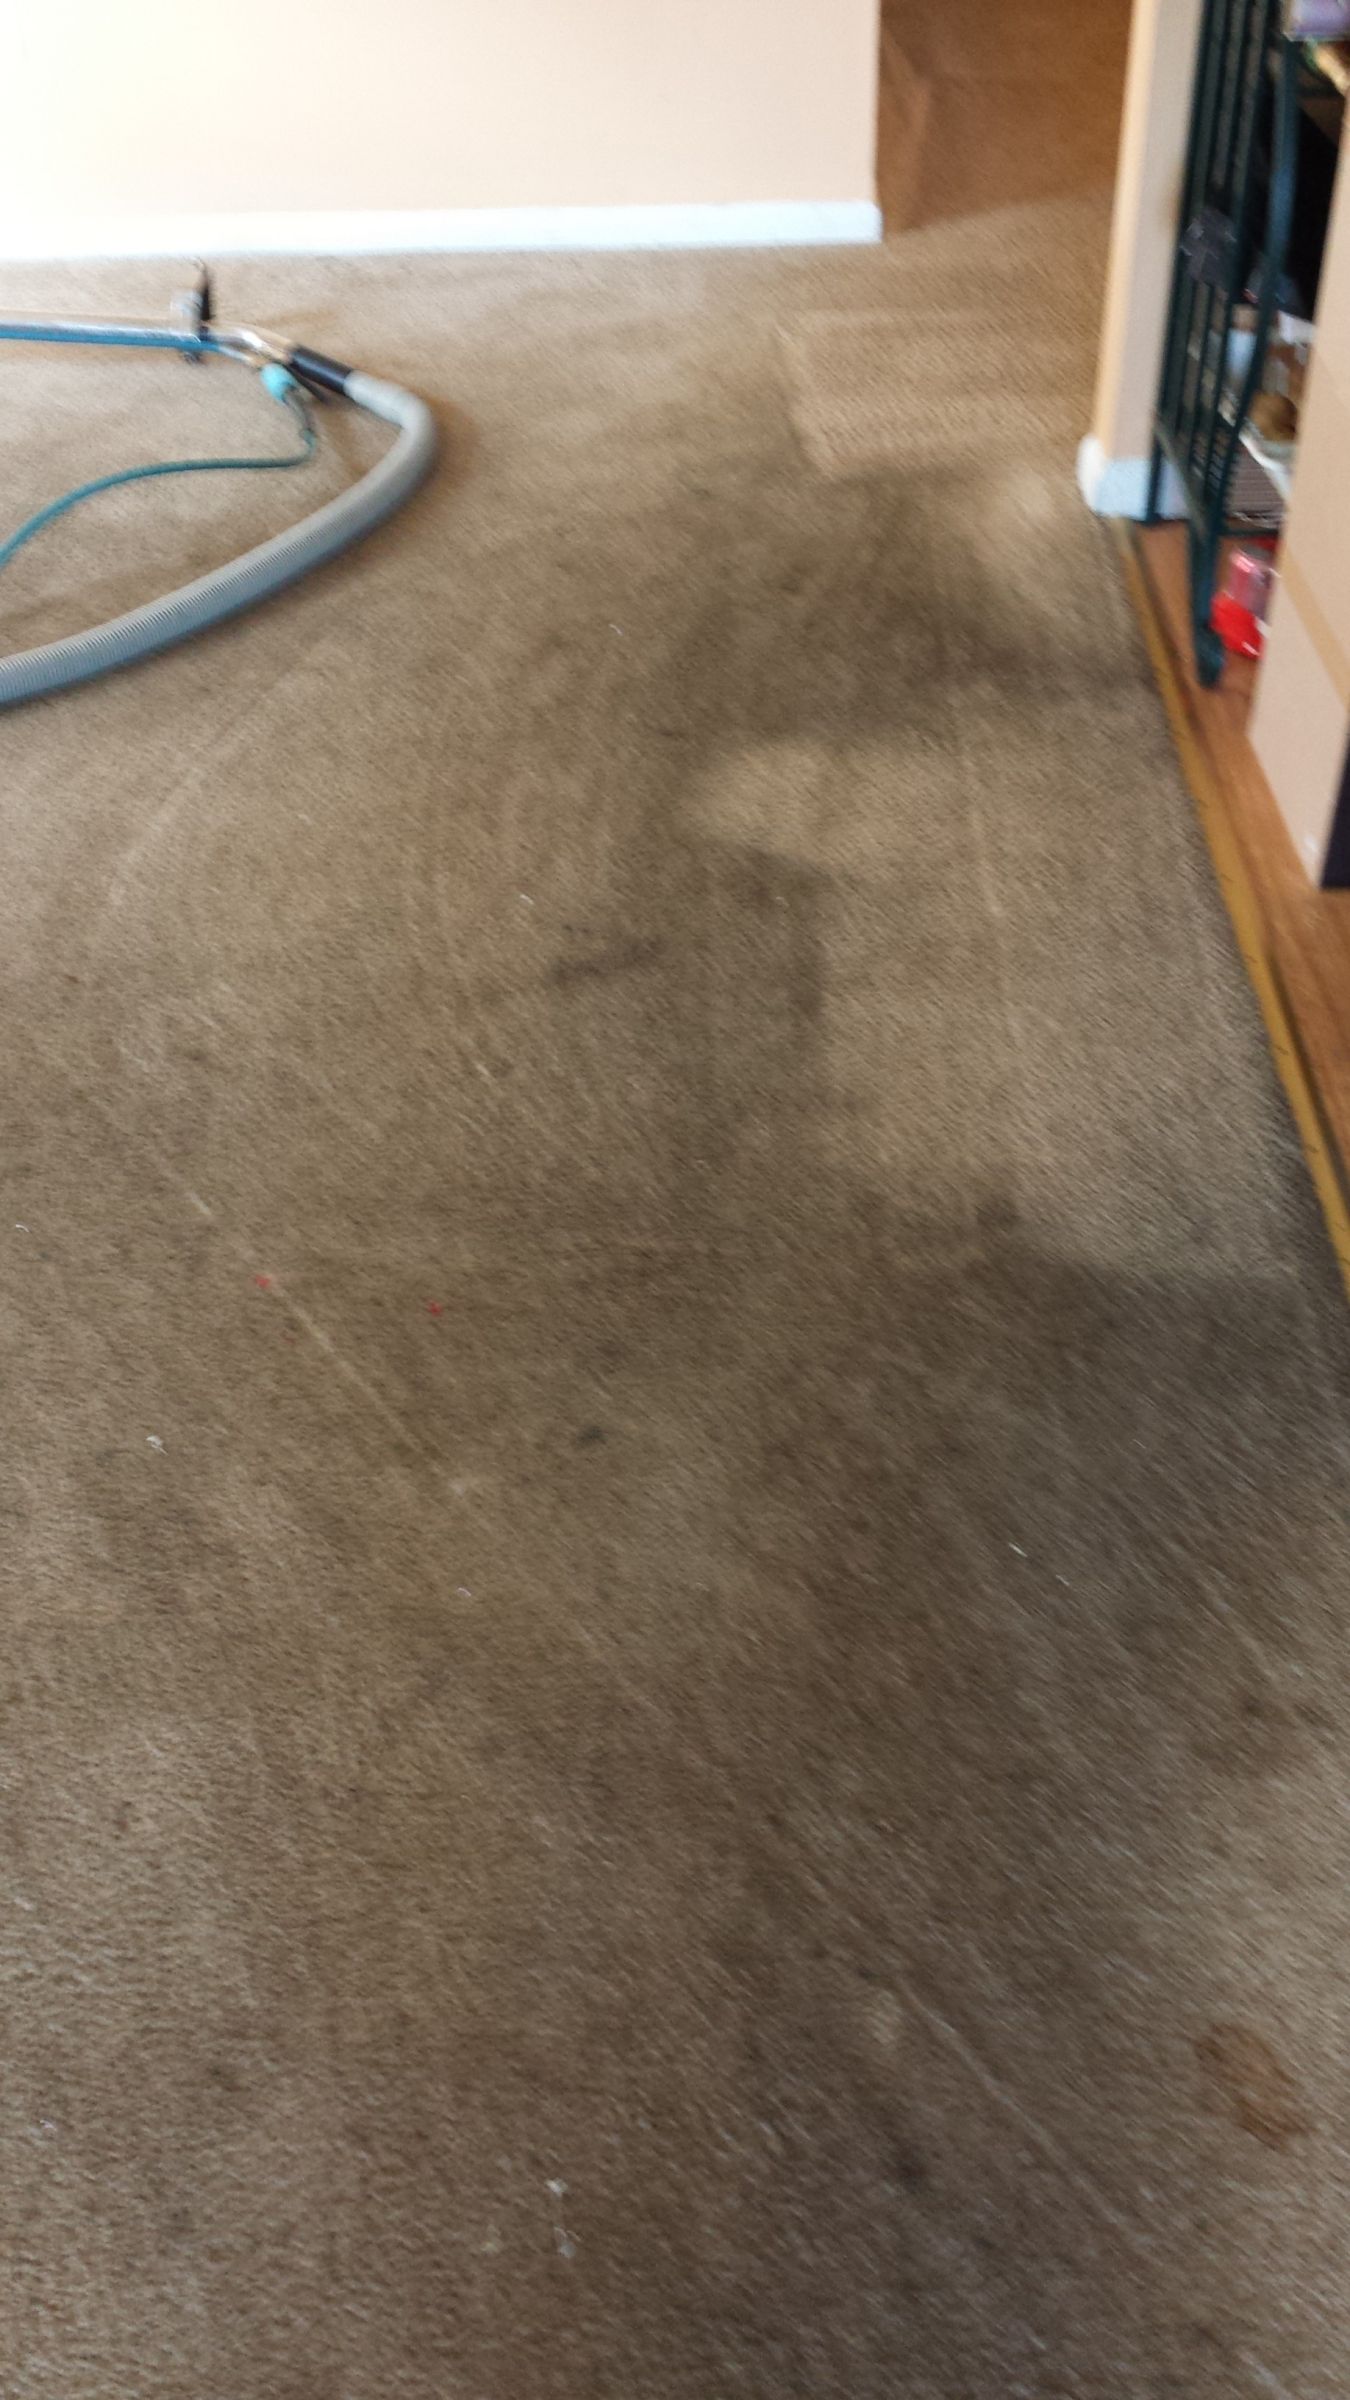 Breathe with Allergy-Friendly Moorestown, NJ Carpet Cleaning